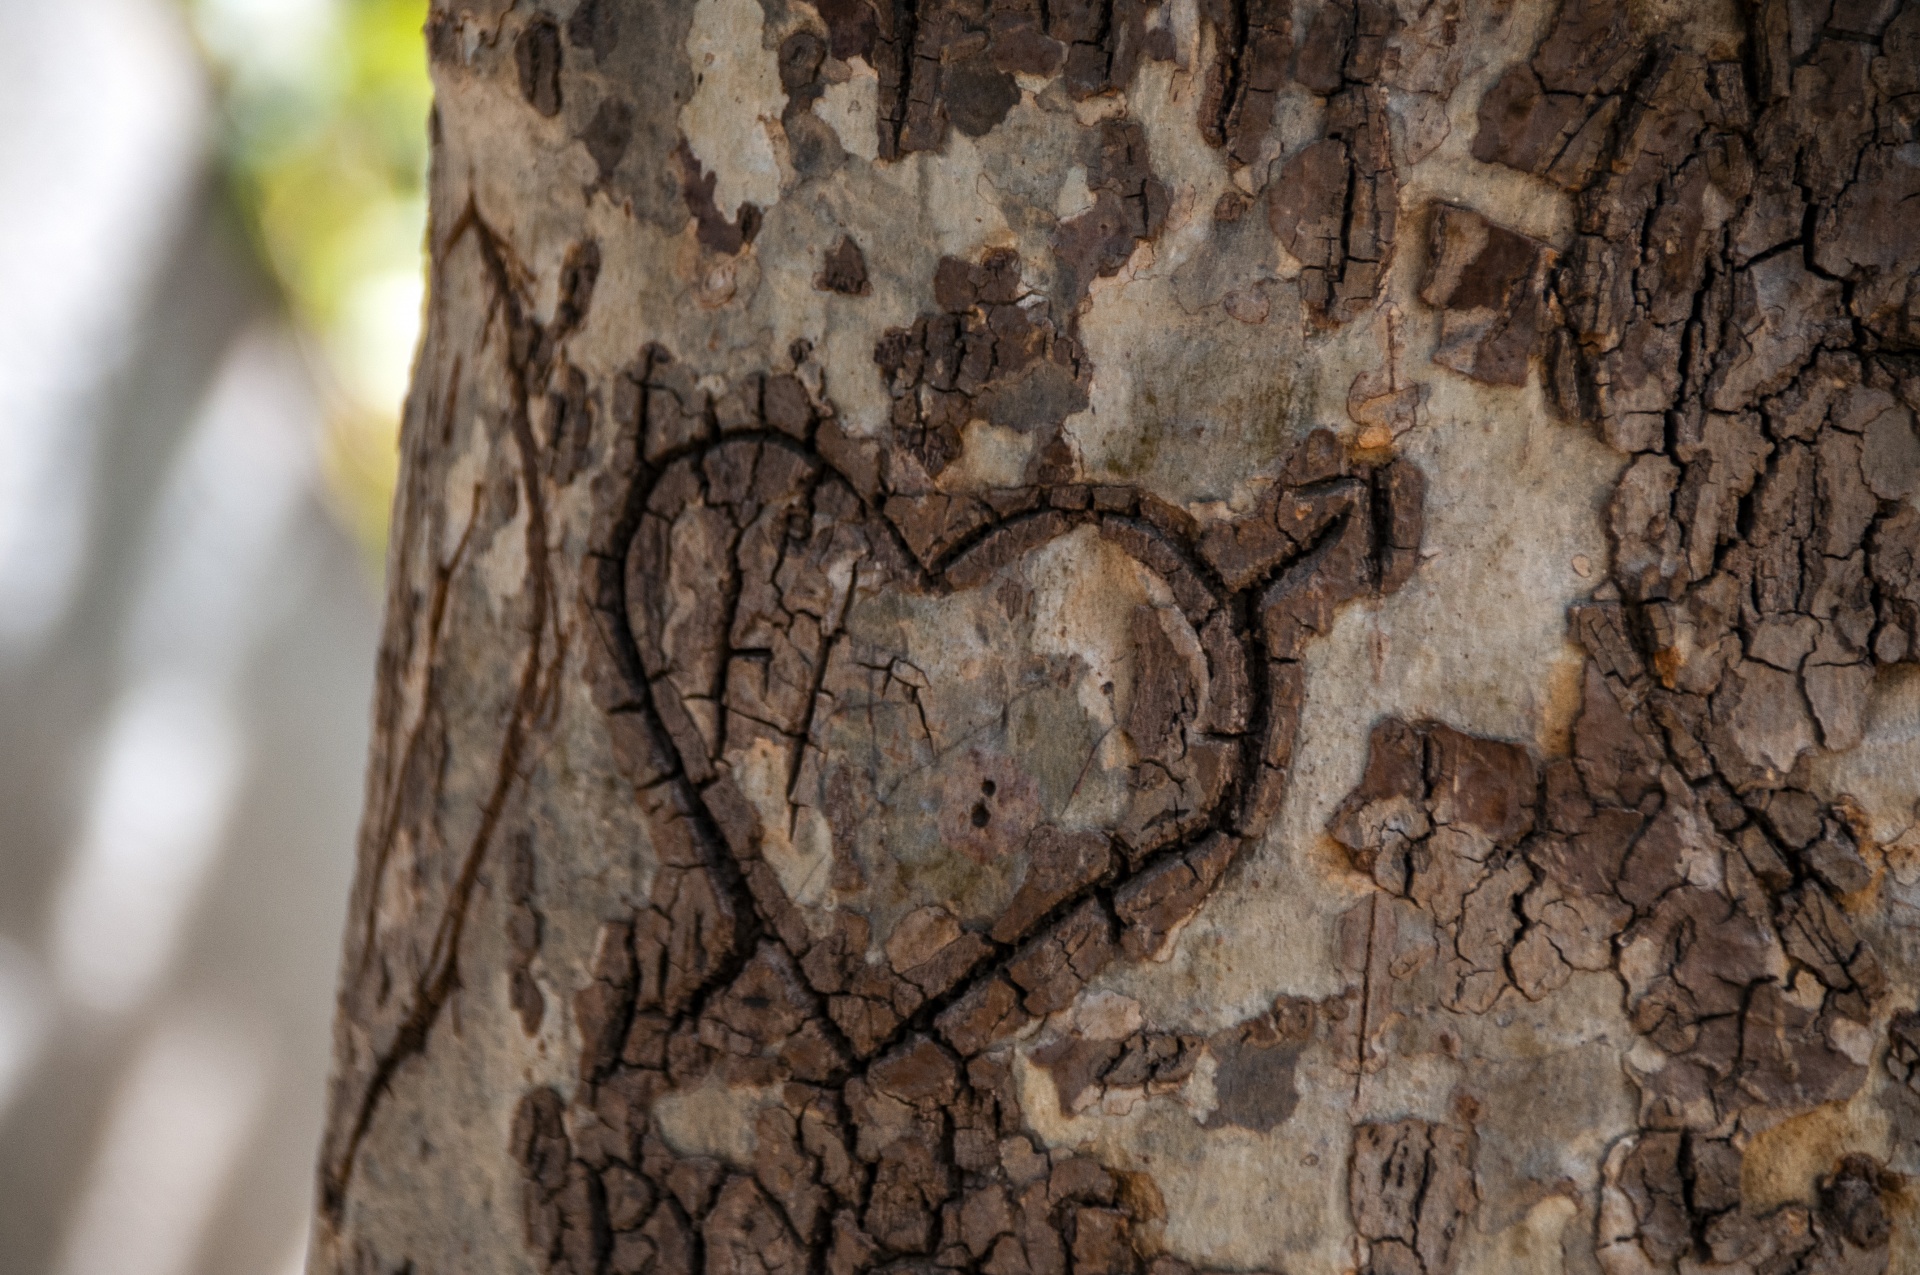 heart carved in tree